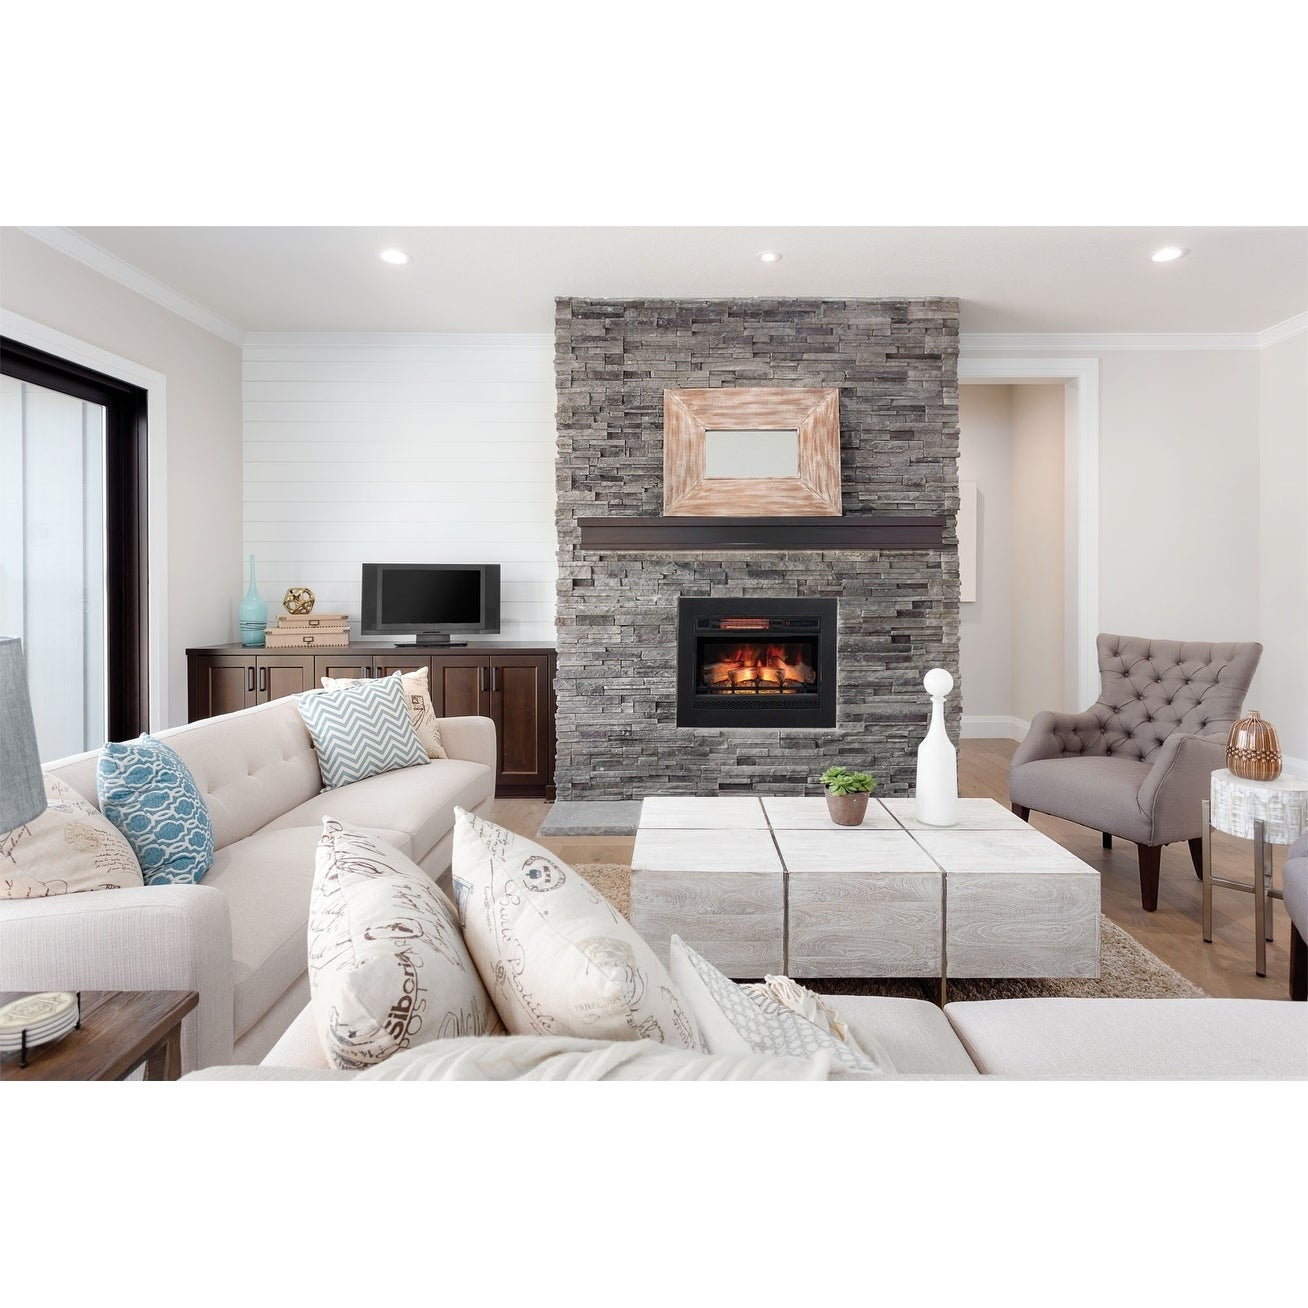 Fake Fireplaces for Sale New Classicflame 26" 3d Infrared Quartz Electric Fireplace Insert